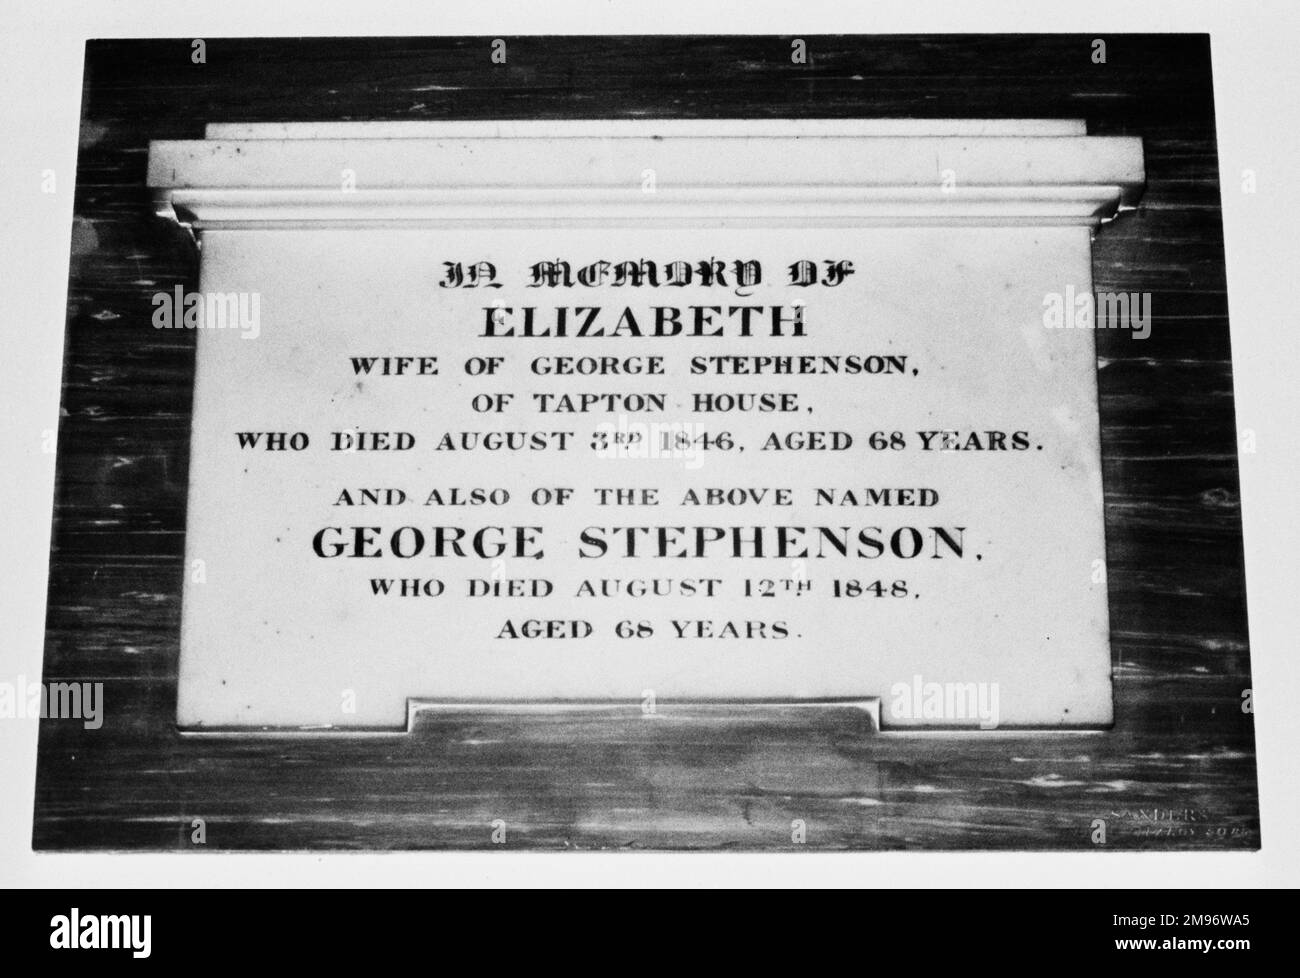 Memorial stone for Elizabeth, wife of George Stephenson, d.1846 aged 68 and G Stephenson, d.1848 aged 68 Stock Photo